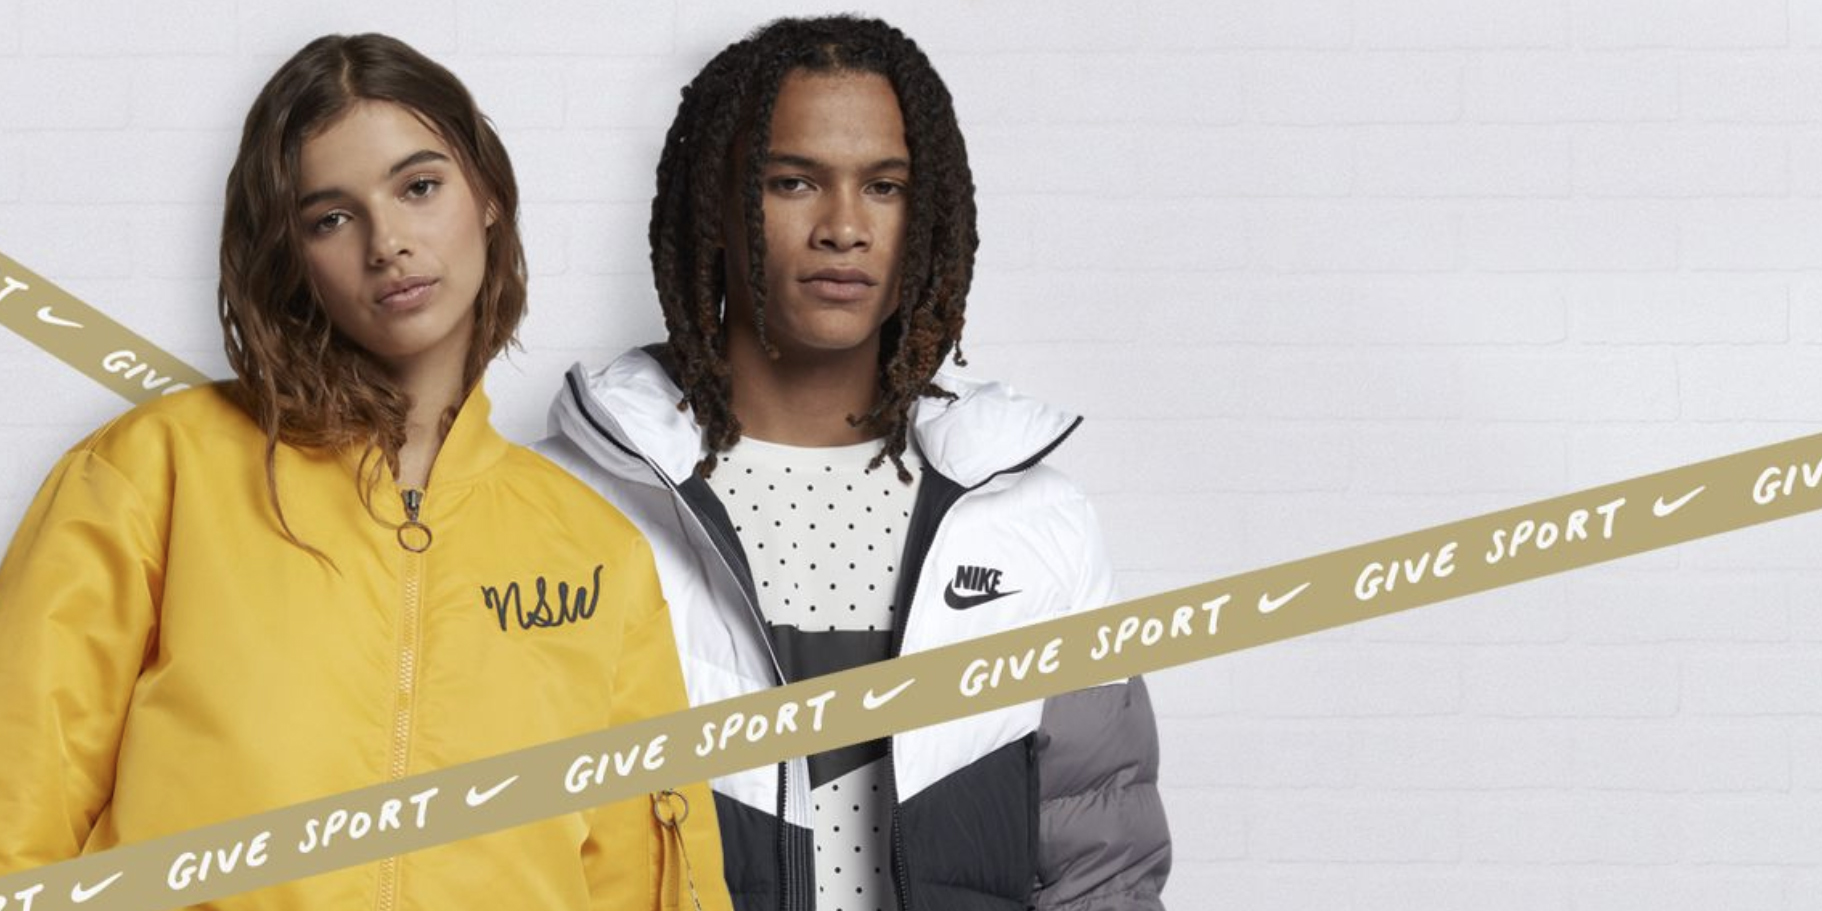 Nike's Friday sale takes an extra off: Dri-FIT, Jordan, Tech Fleece, much more